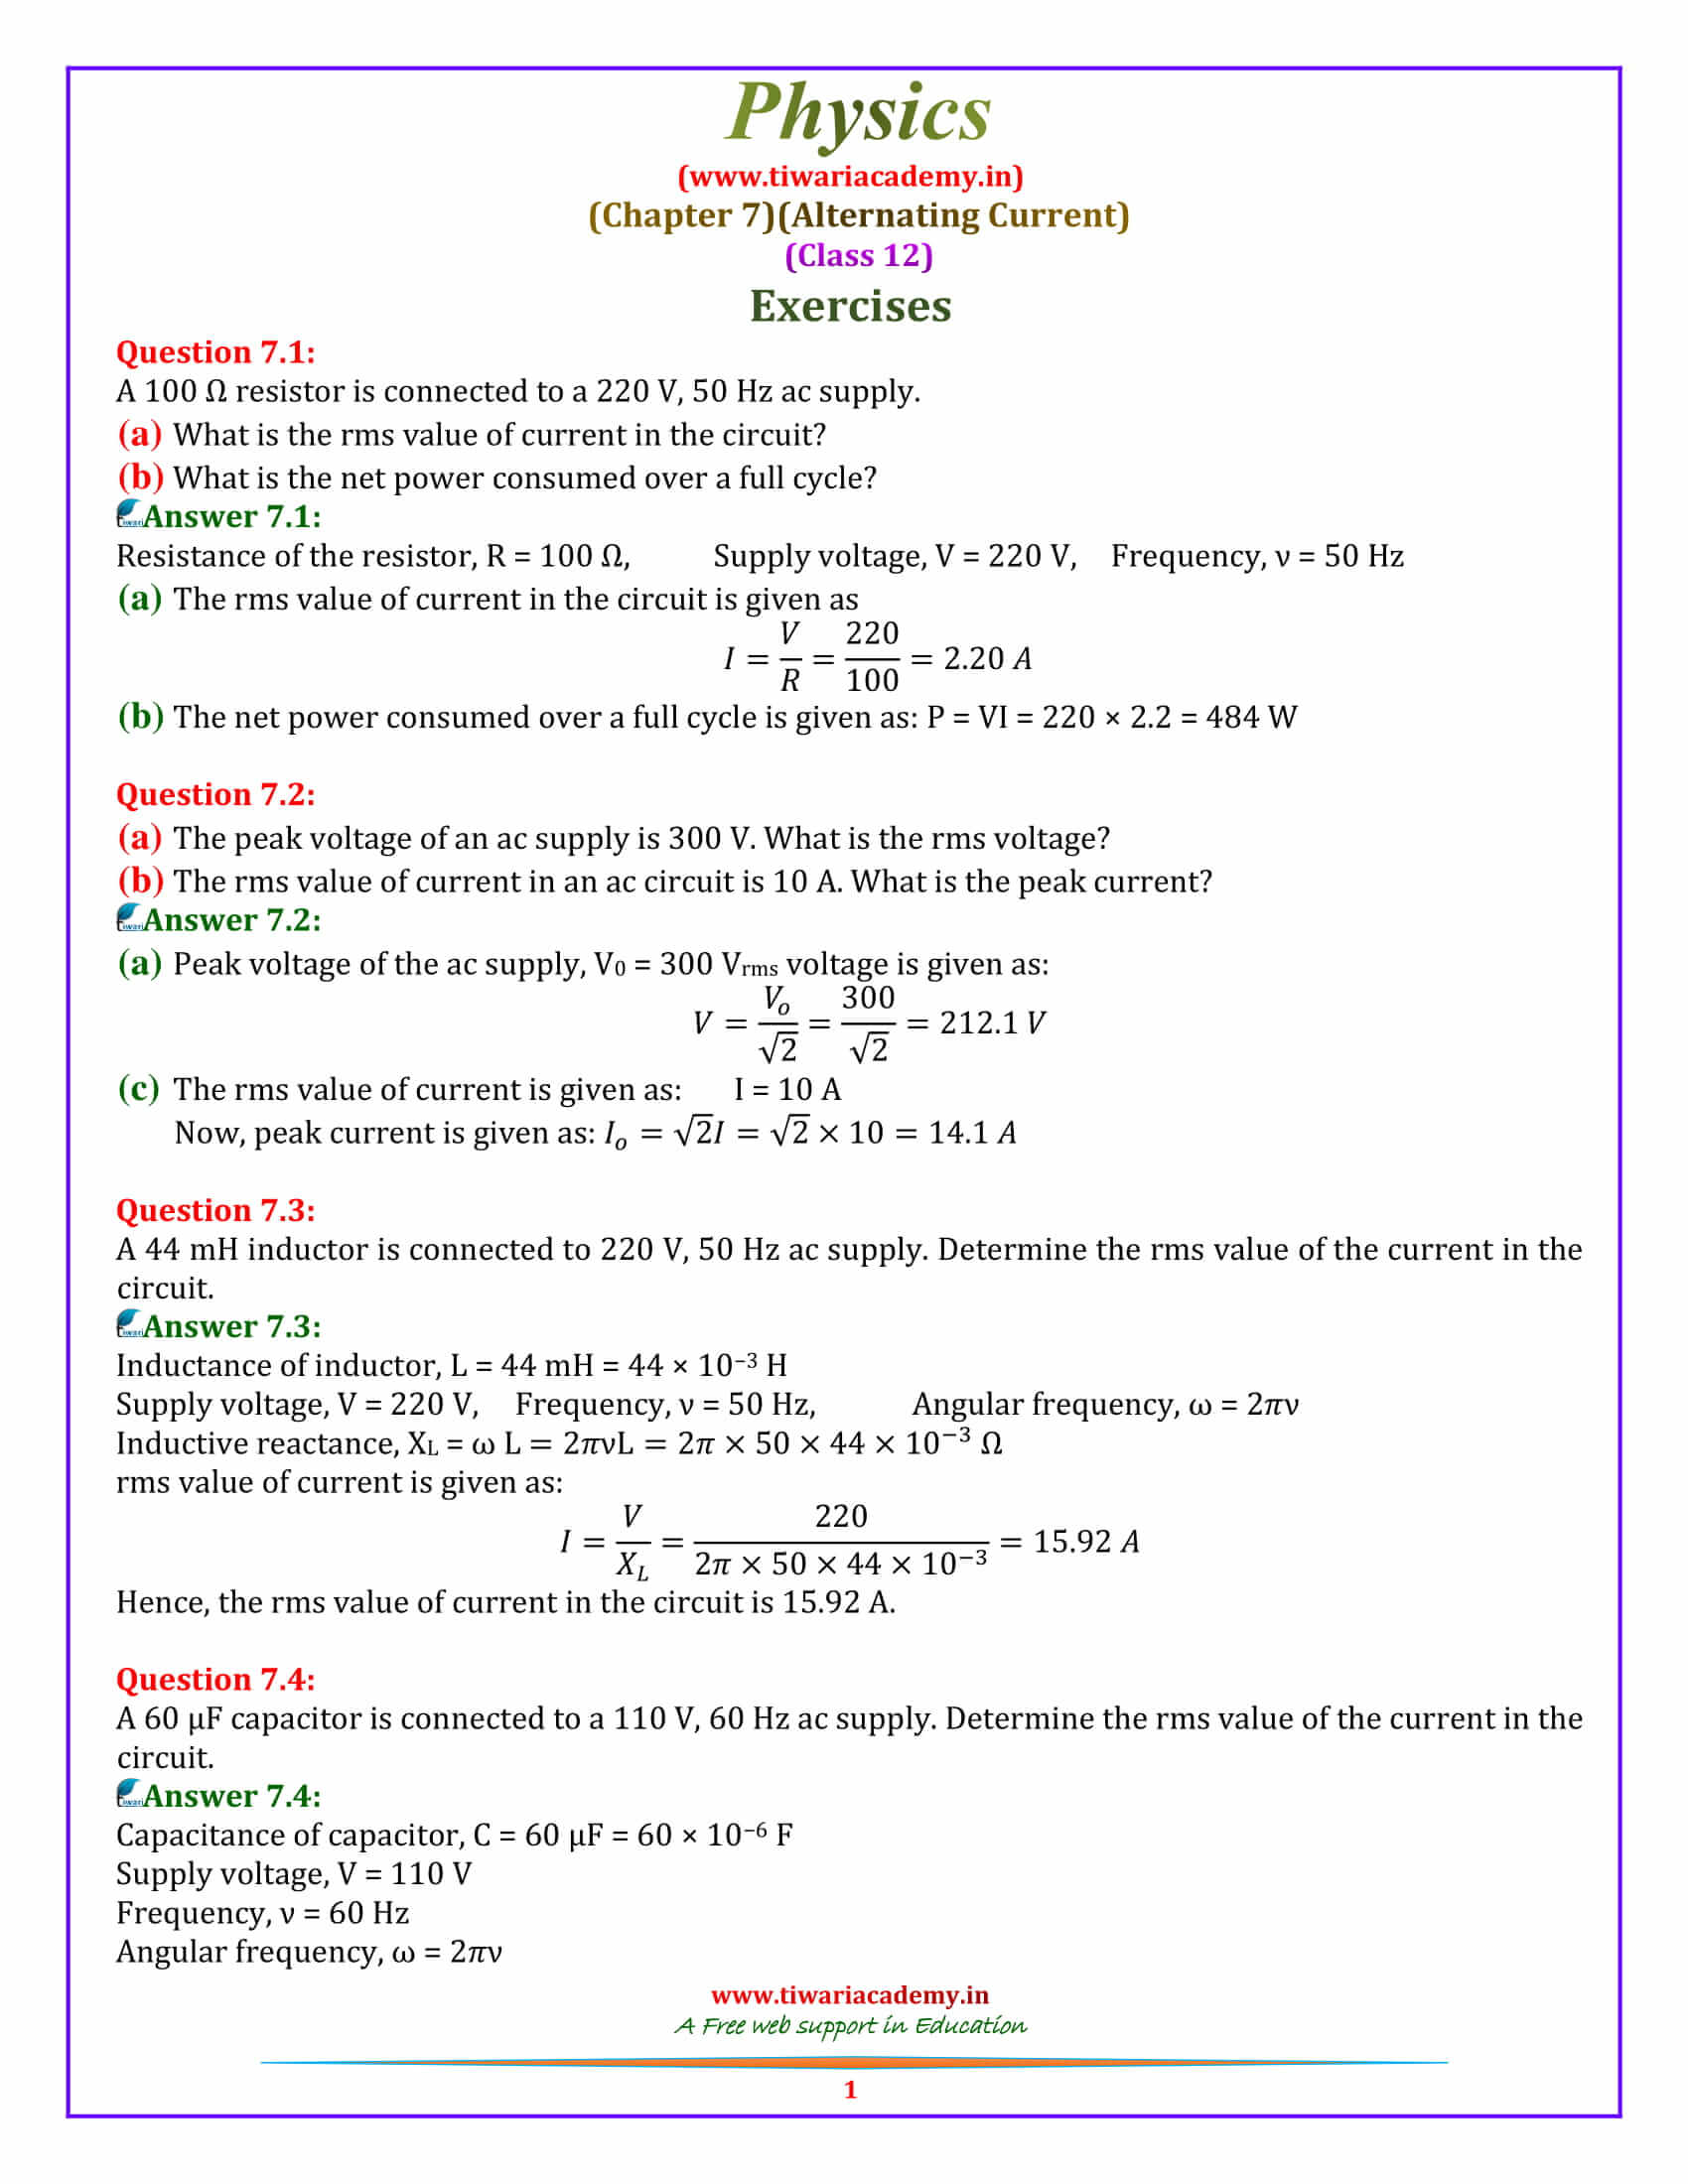 NCERT Solutions for Class 12 Physics Chapter 7 Alternating Current